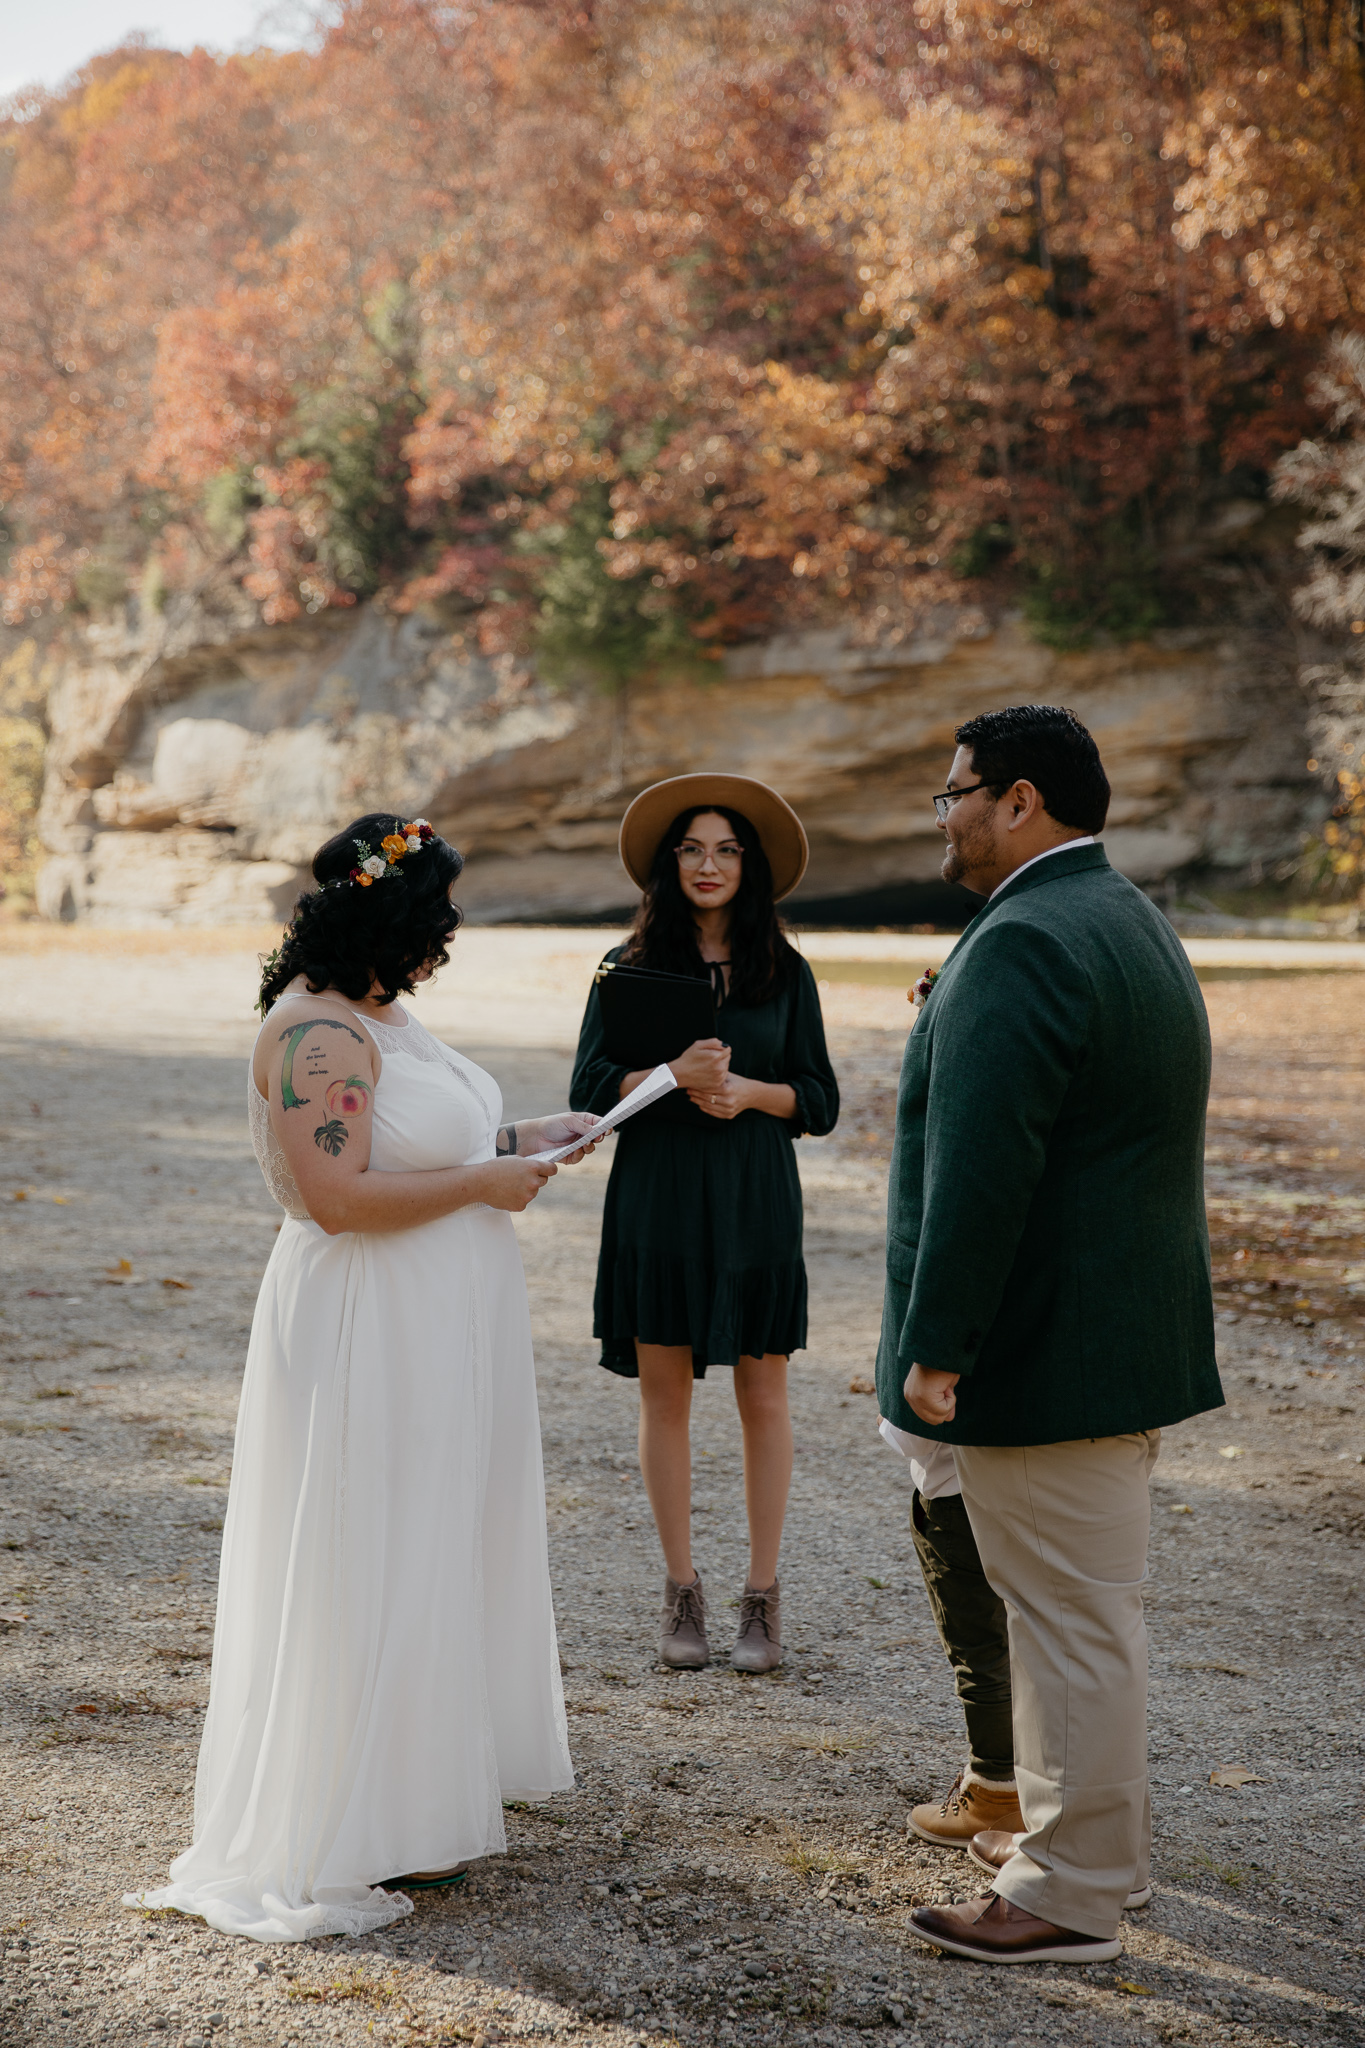 A couple eloping at Turkey Run State Park, shares vows overlooking Sugar Creek